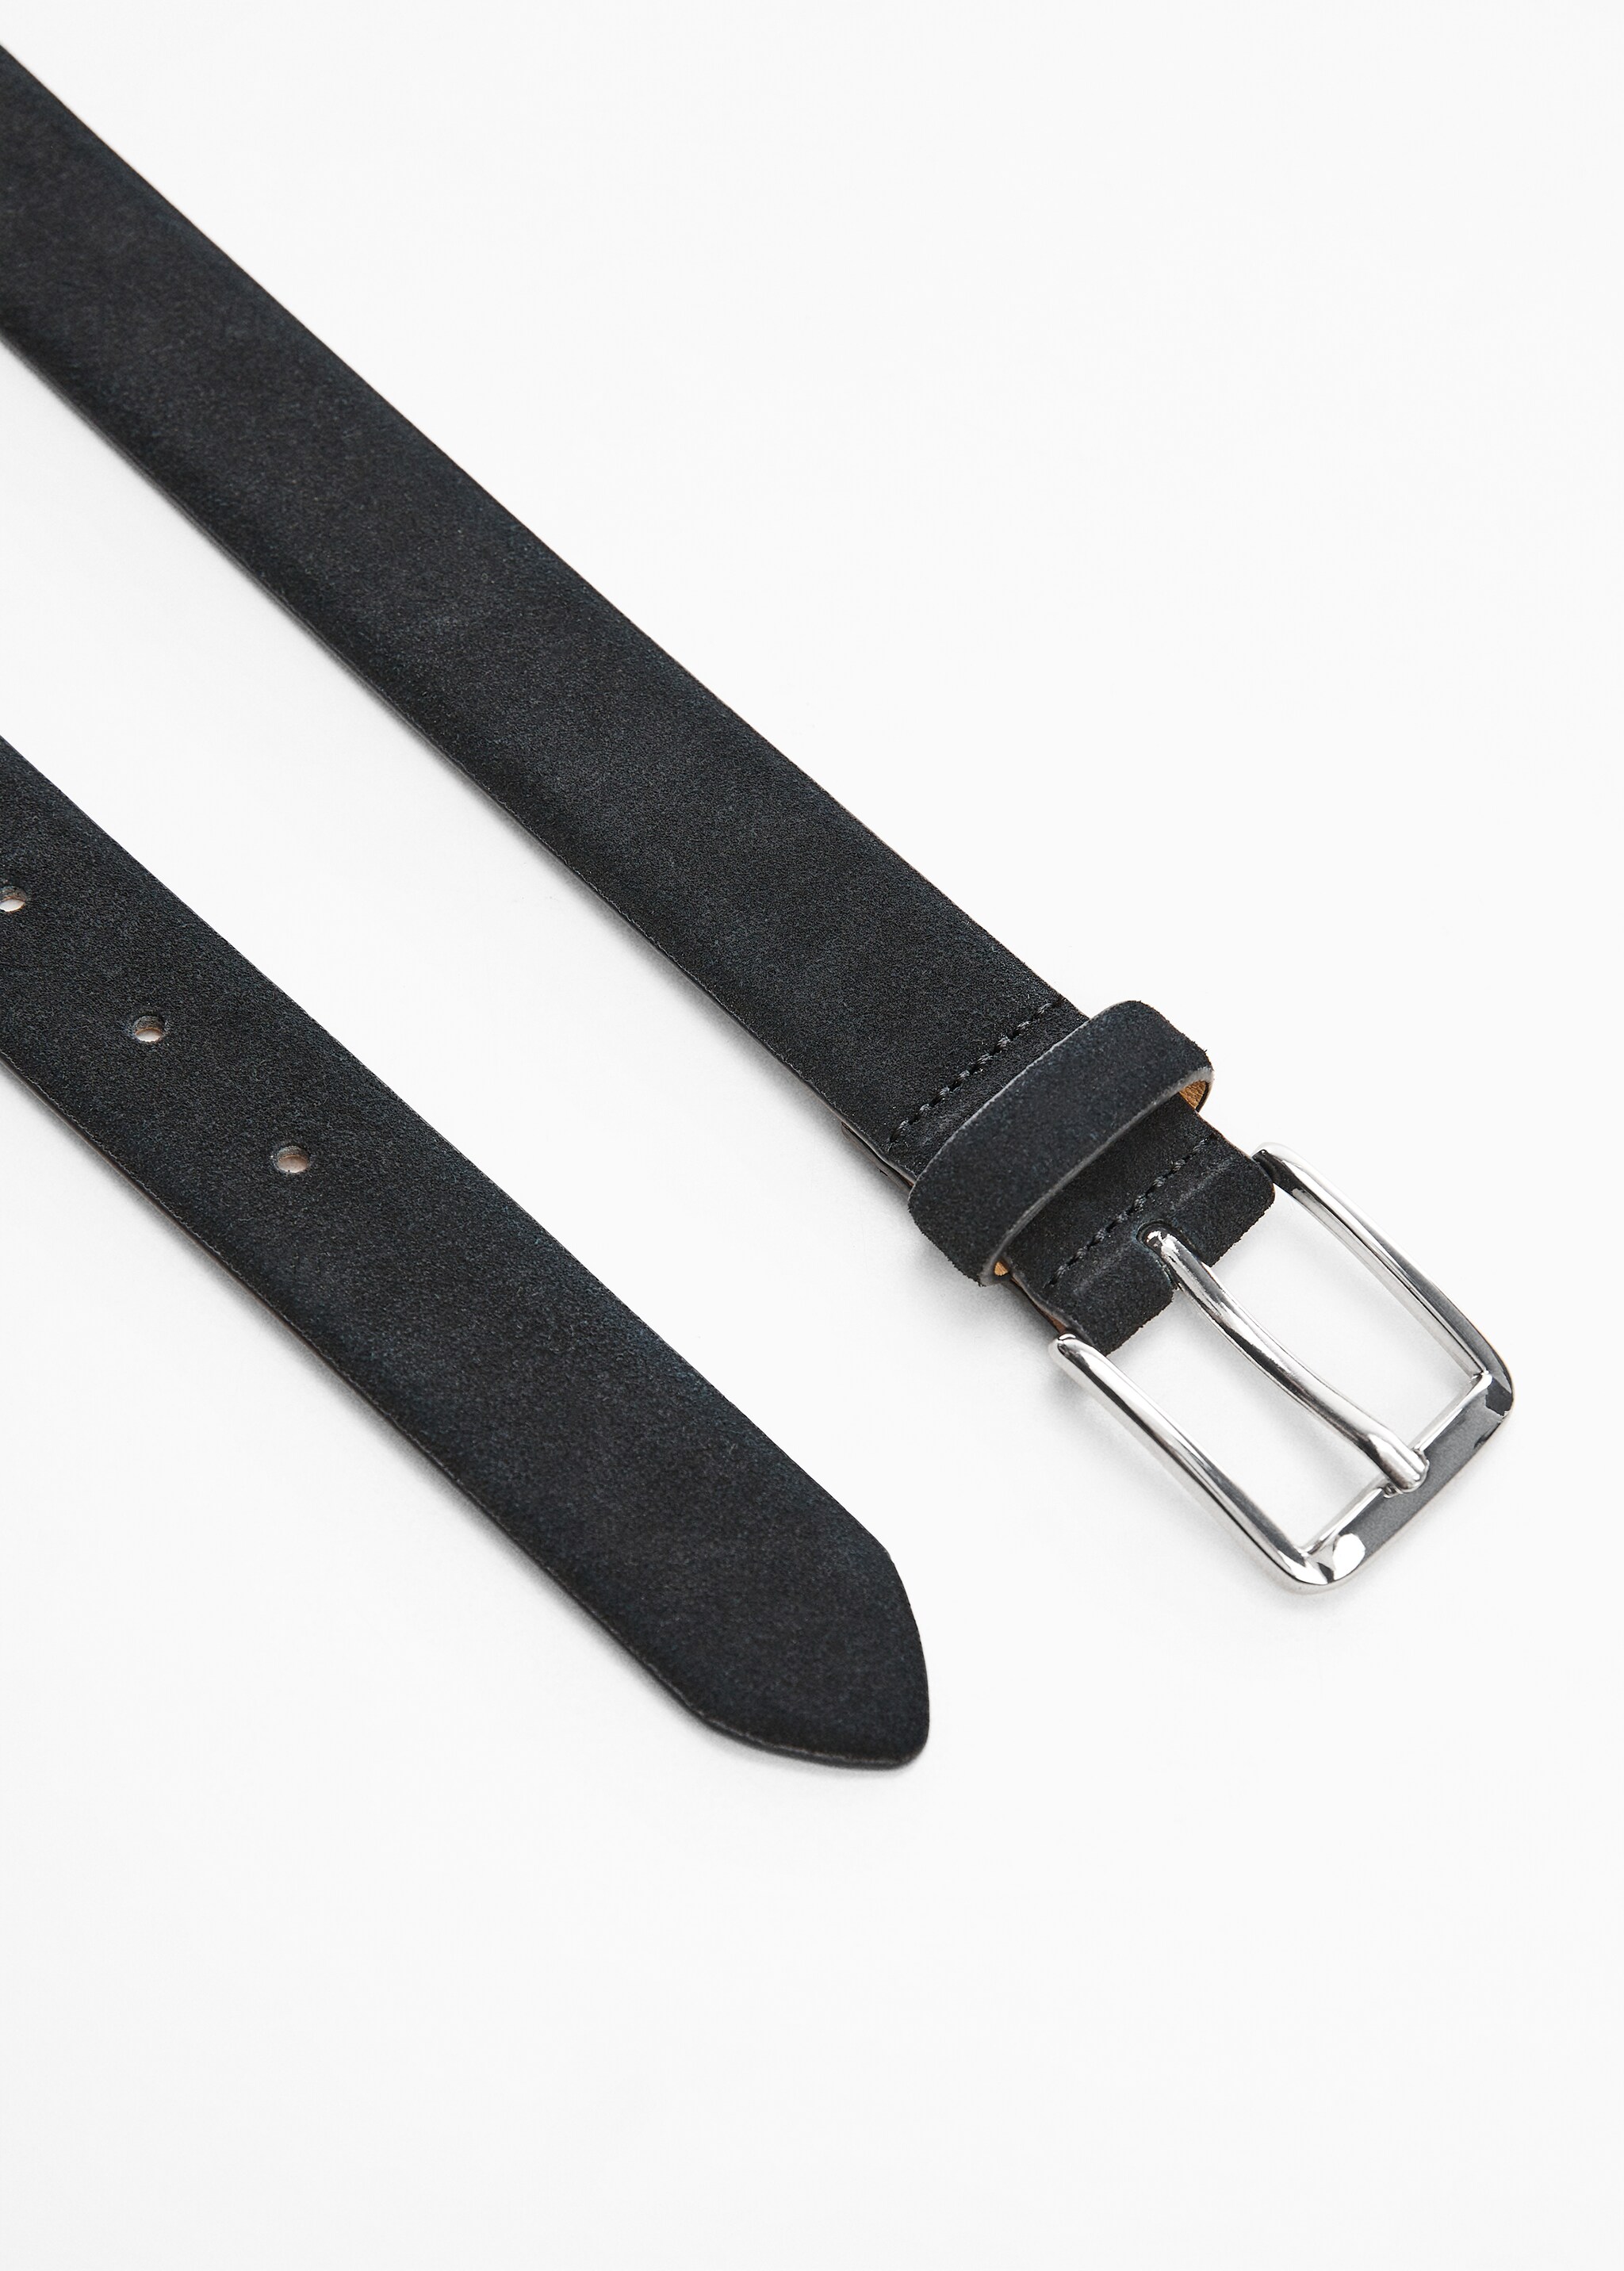 Suede belt - Details of the article 1